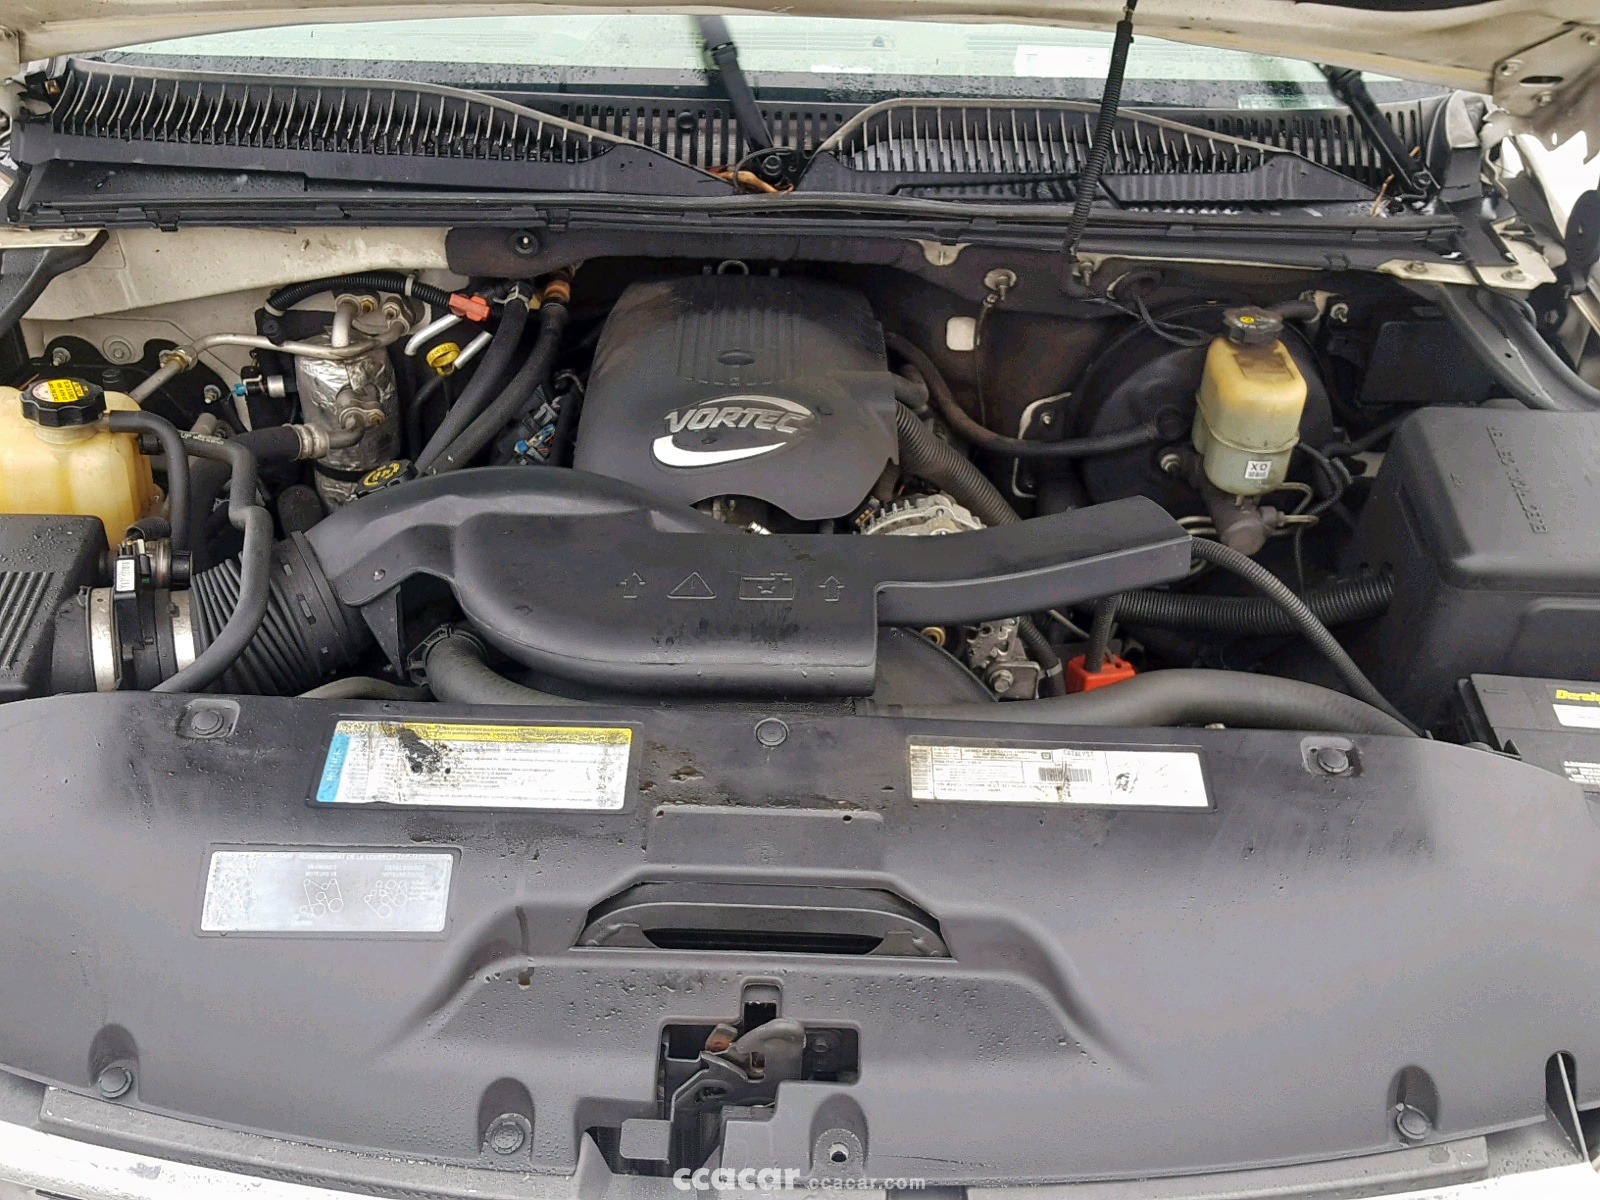 02 tahoe dies but starts right backup